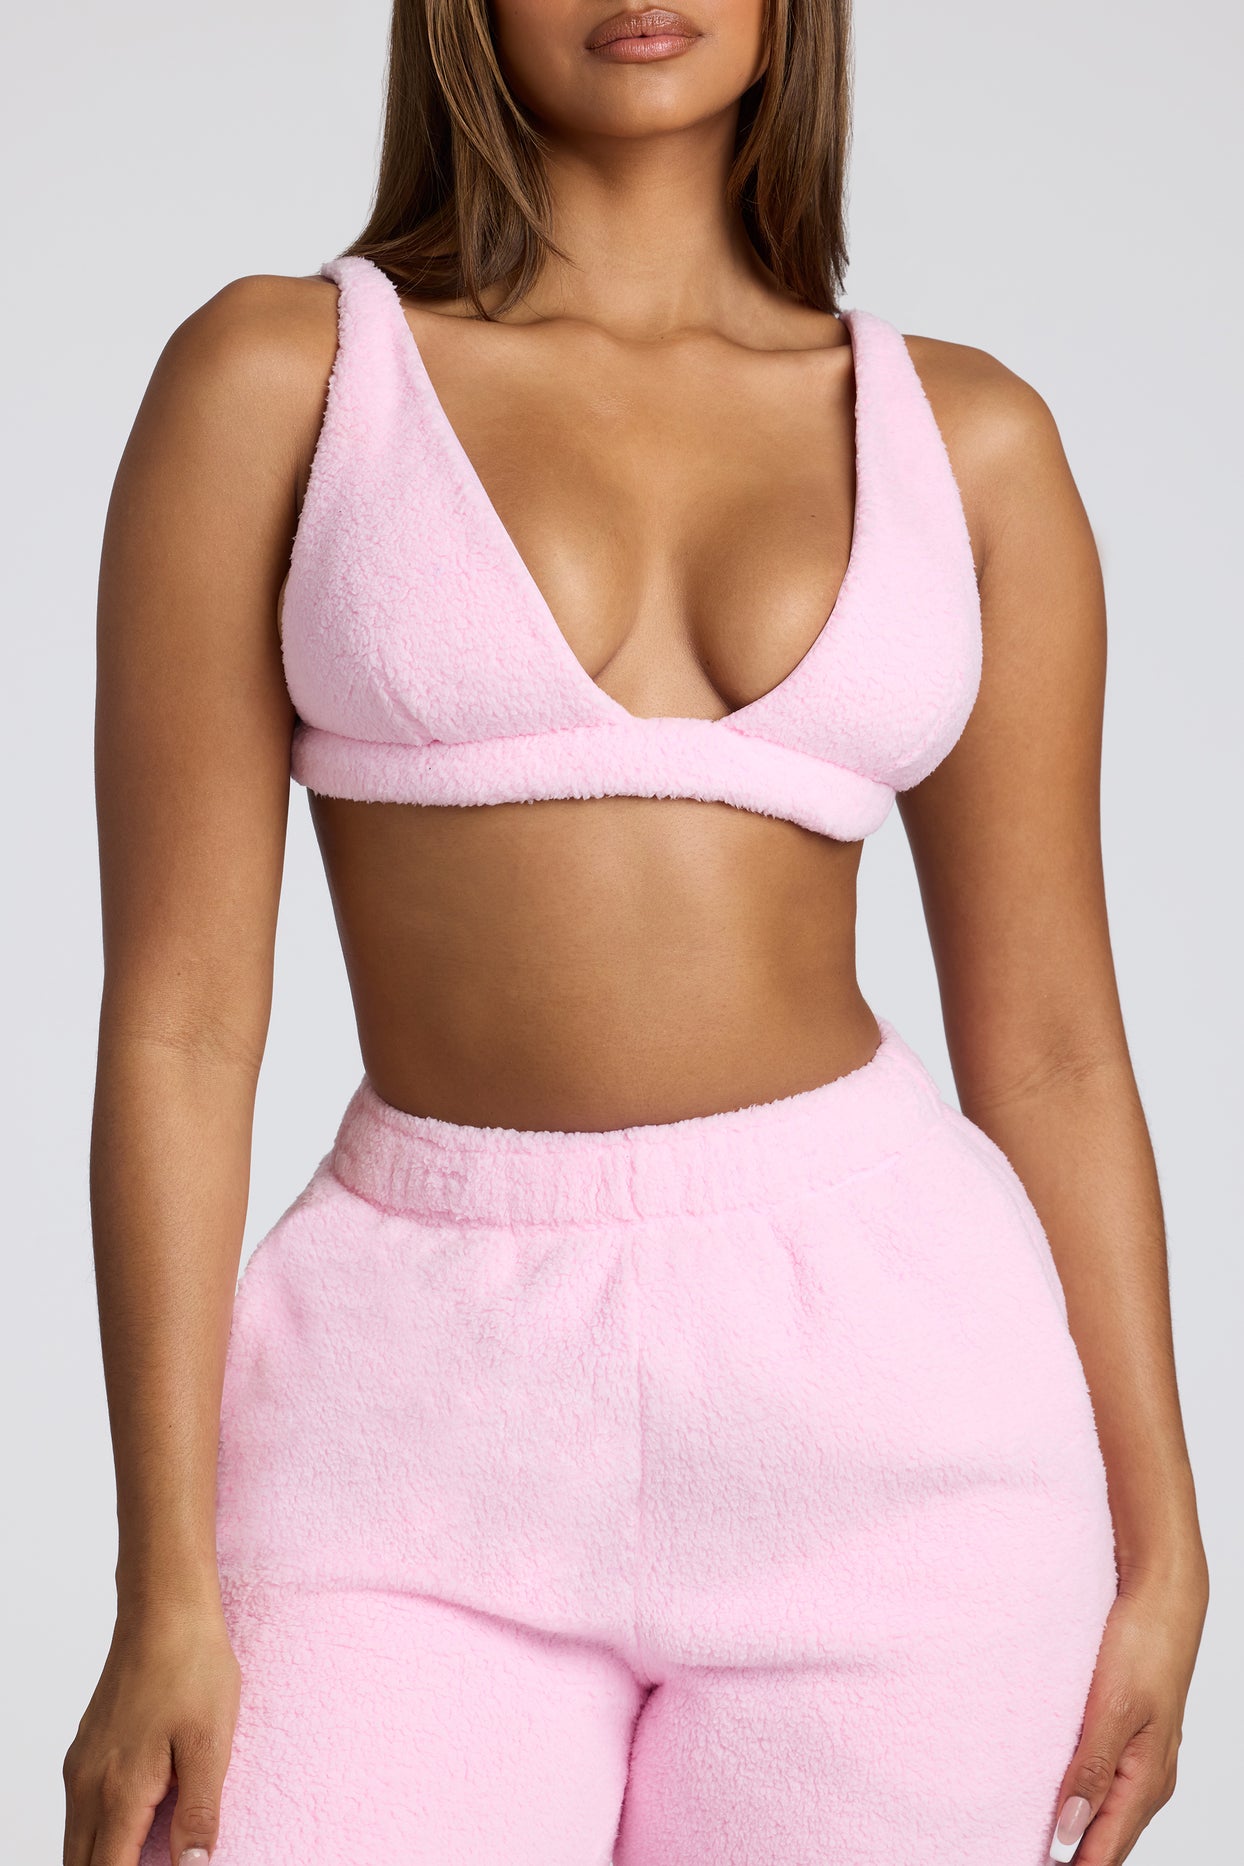 Buy Hand Knit Bralette in Baby Pink, Cotton Knit Bra, Fitted Yoga Top,  Minimal V Neck Crop Top, Soft Comfortable Bra, Cropped Womens Tops Online  in India 